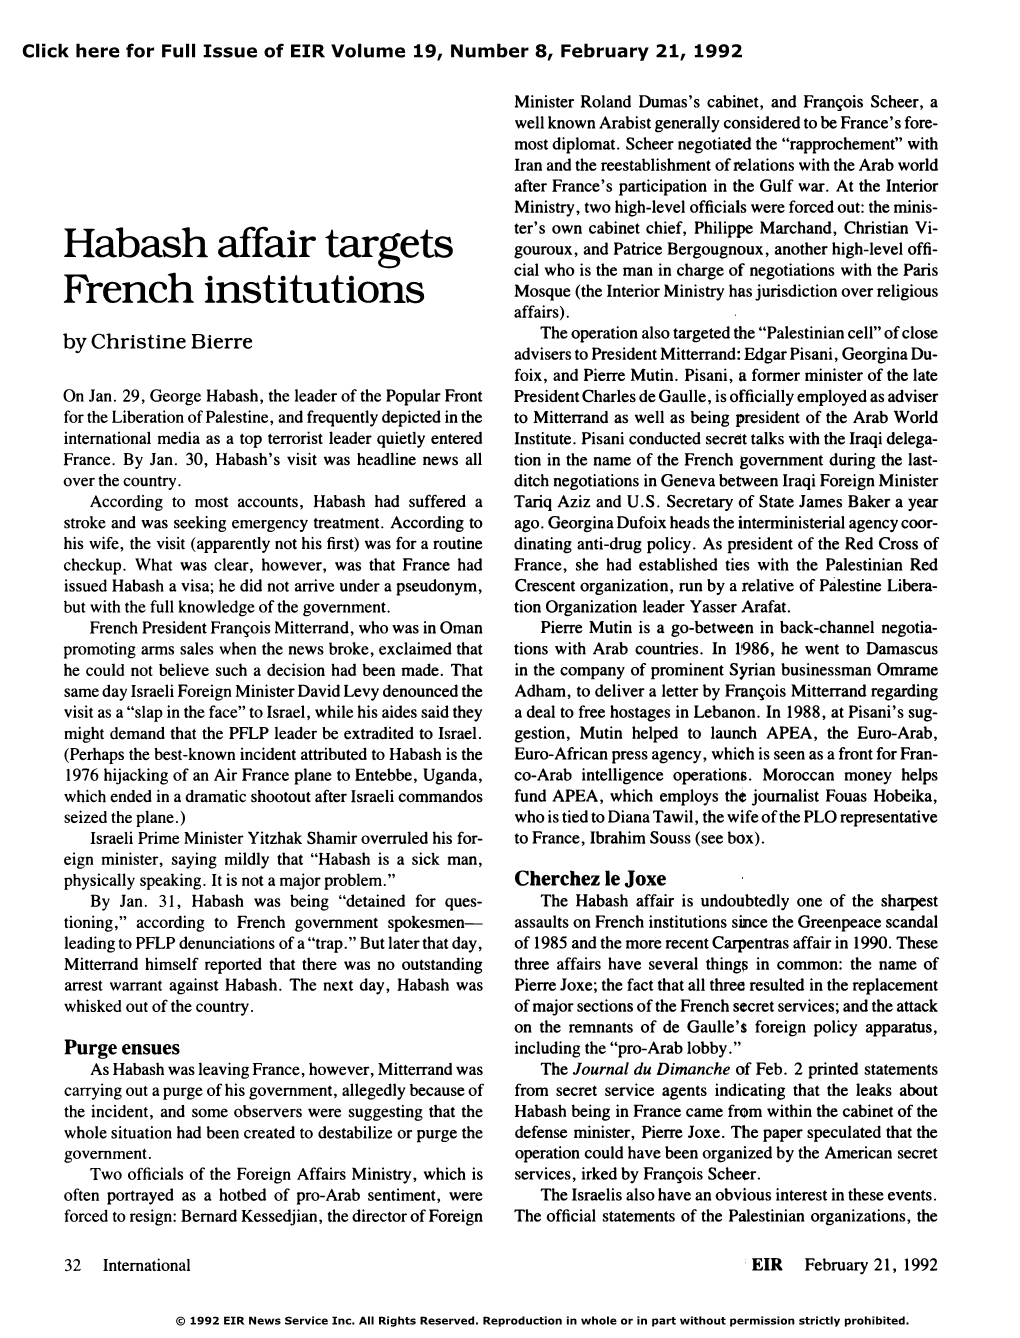 Habash Affair Targets French Institutions